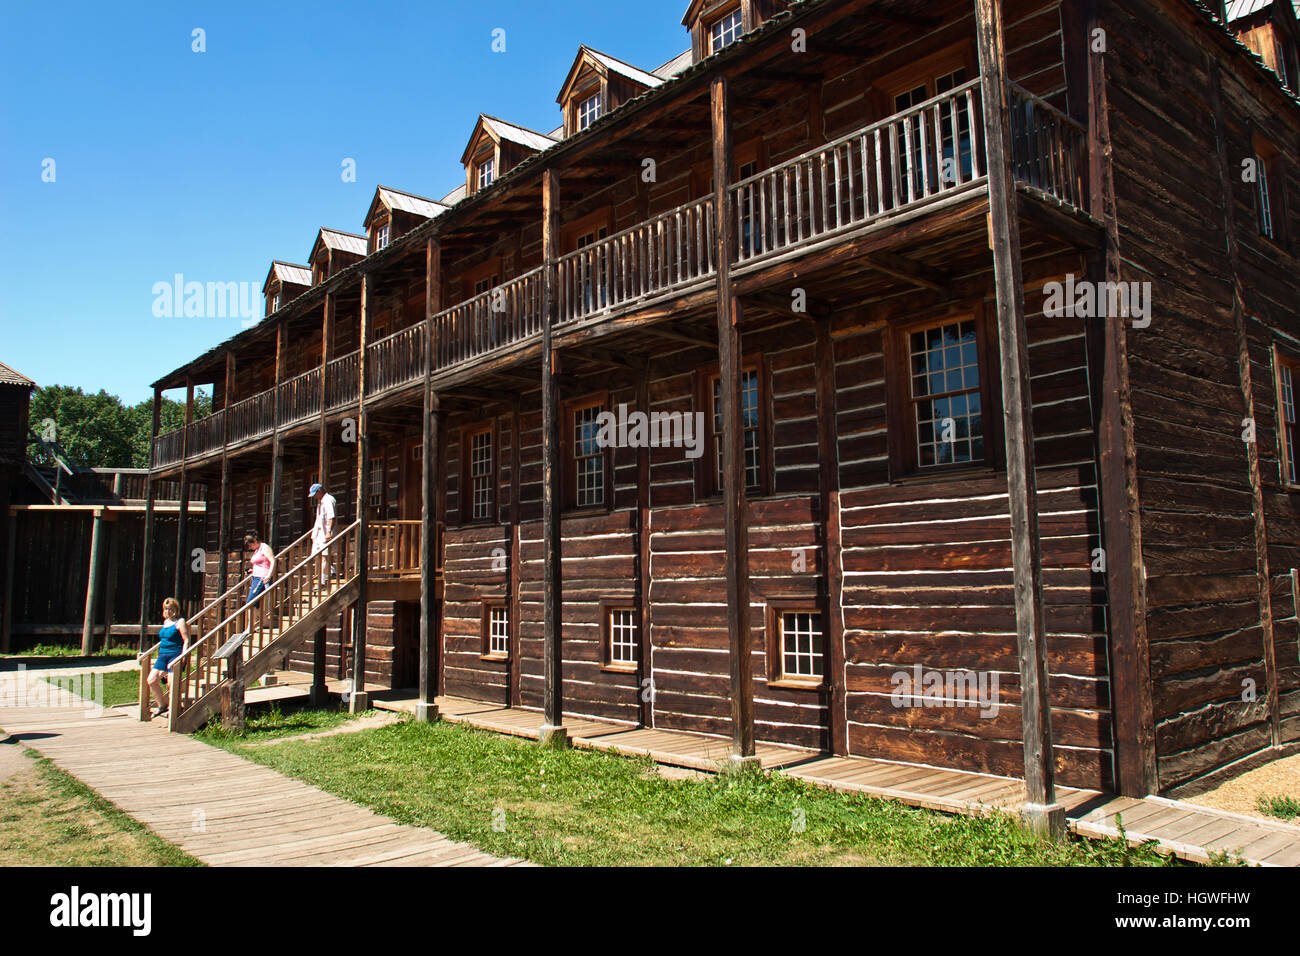 Fort Edmonton, Alberta, Canada, British fort that became Edmonton, log walls of a headquarters building with covered walkway Stock Photo